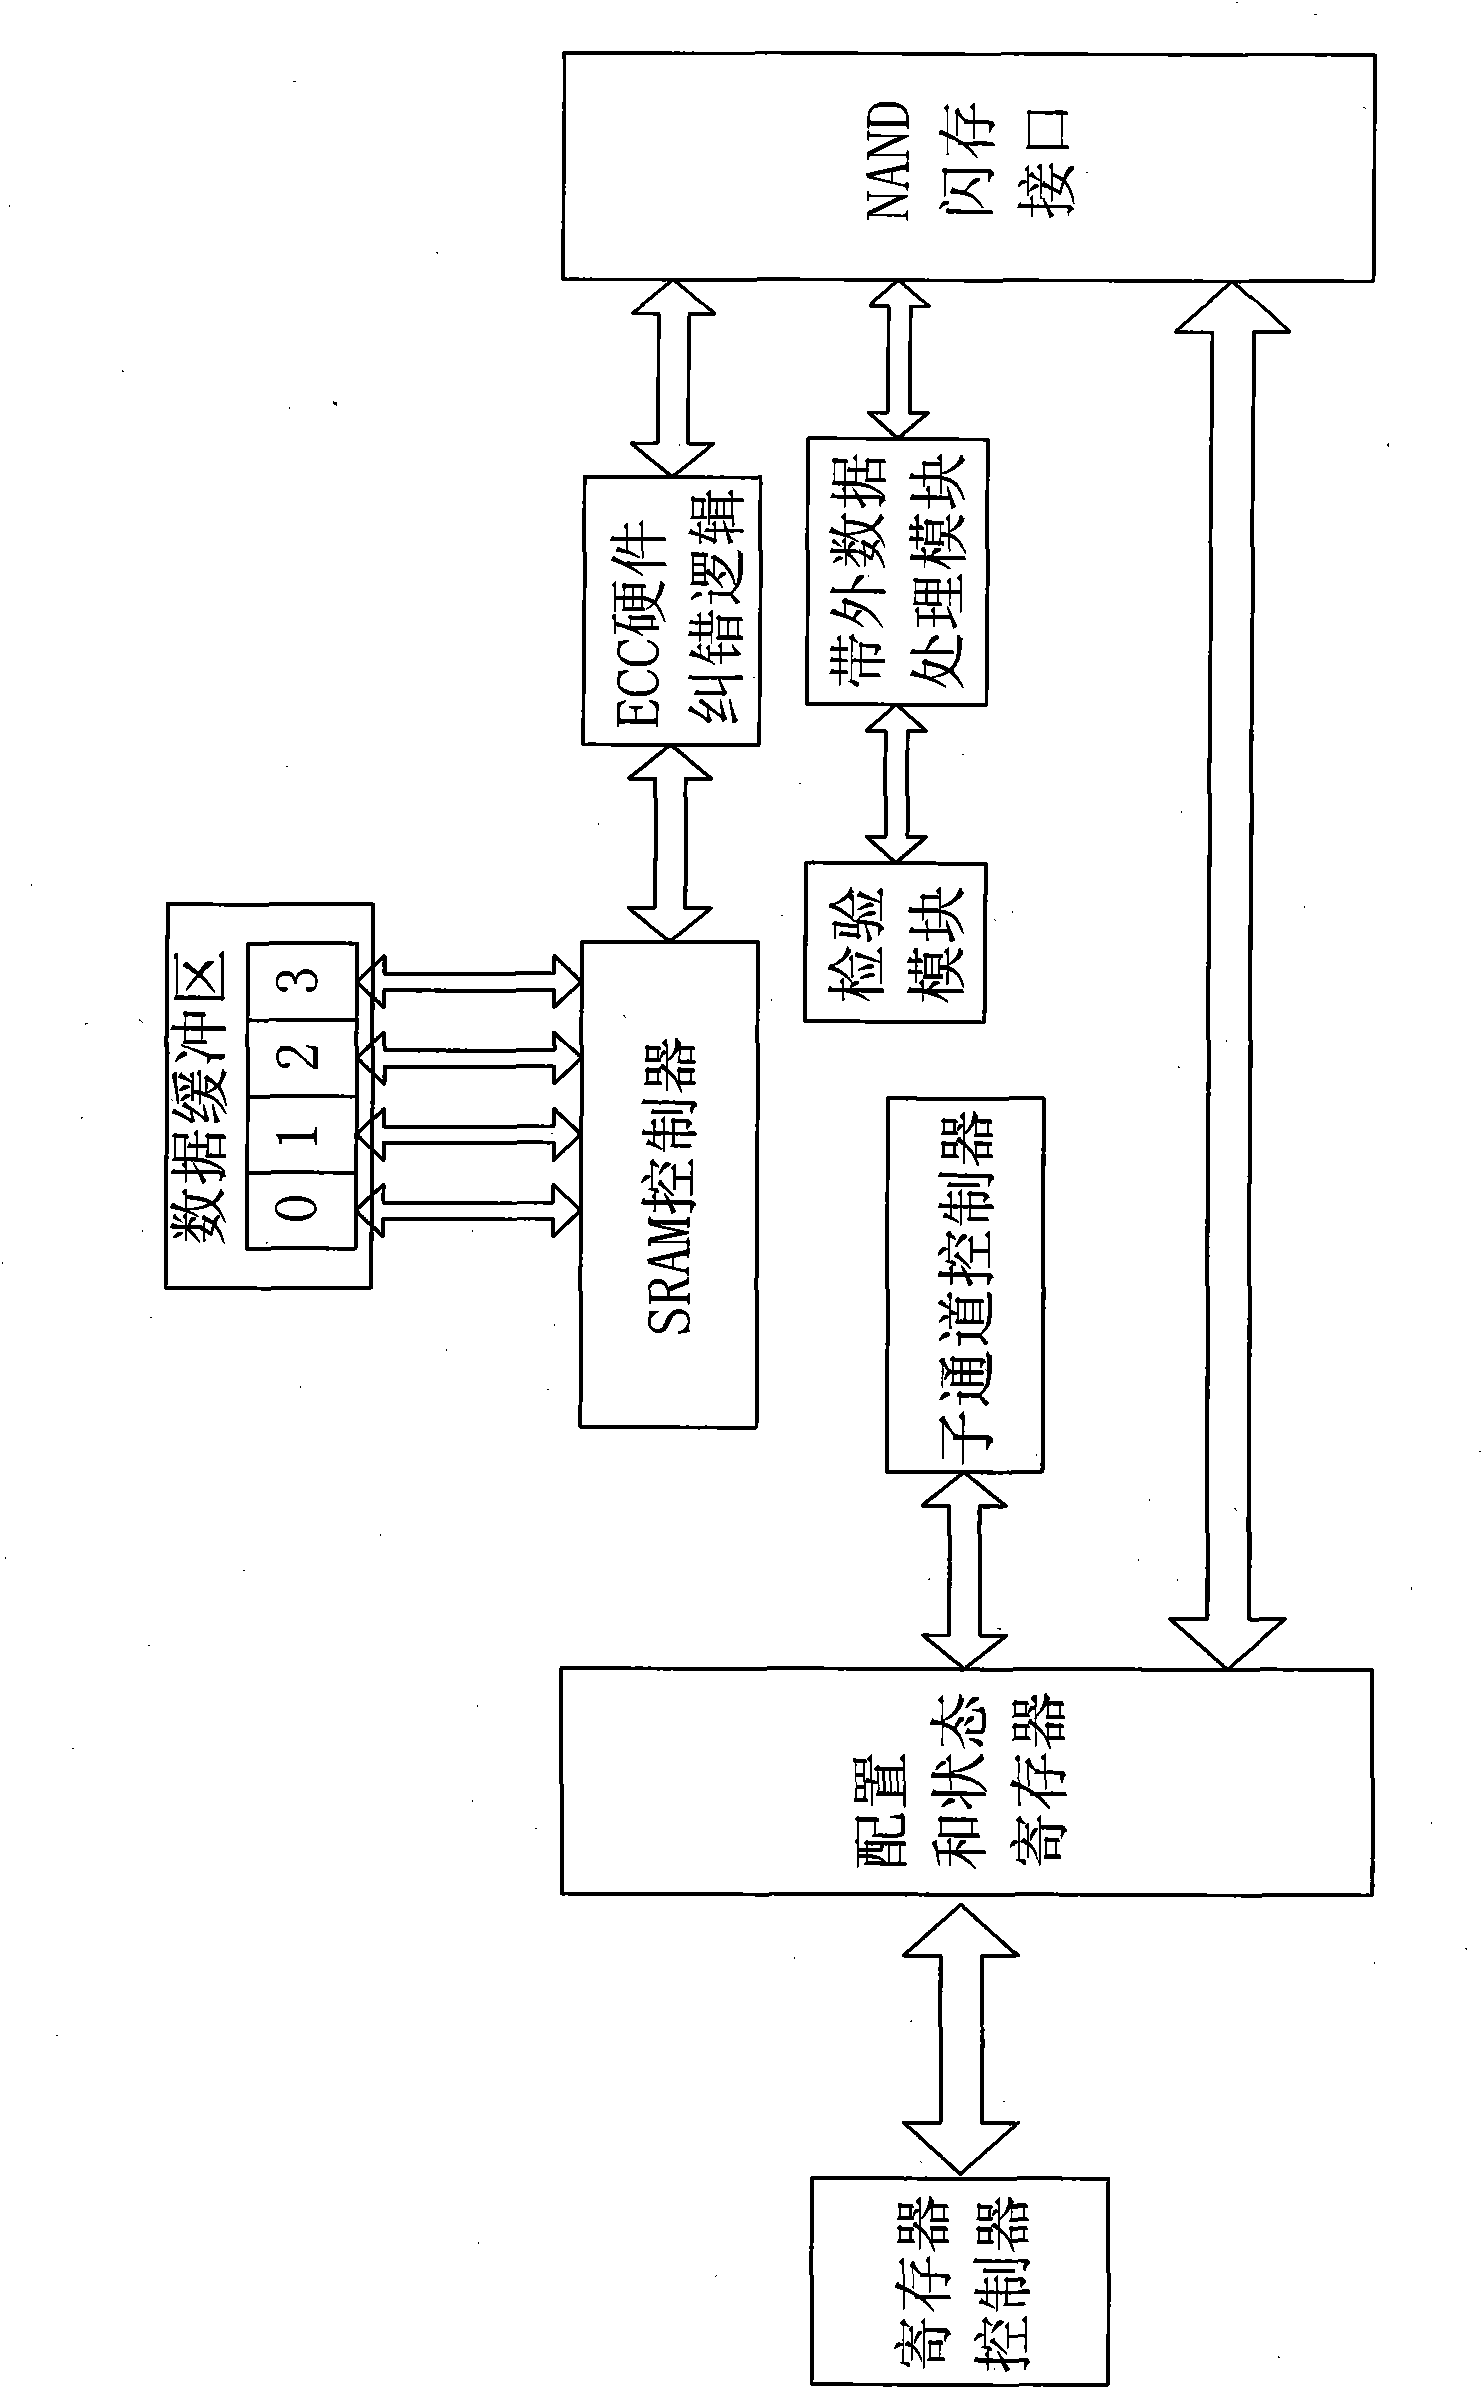 Flash memory controller for solid-state hard-disk